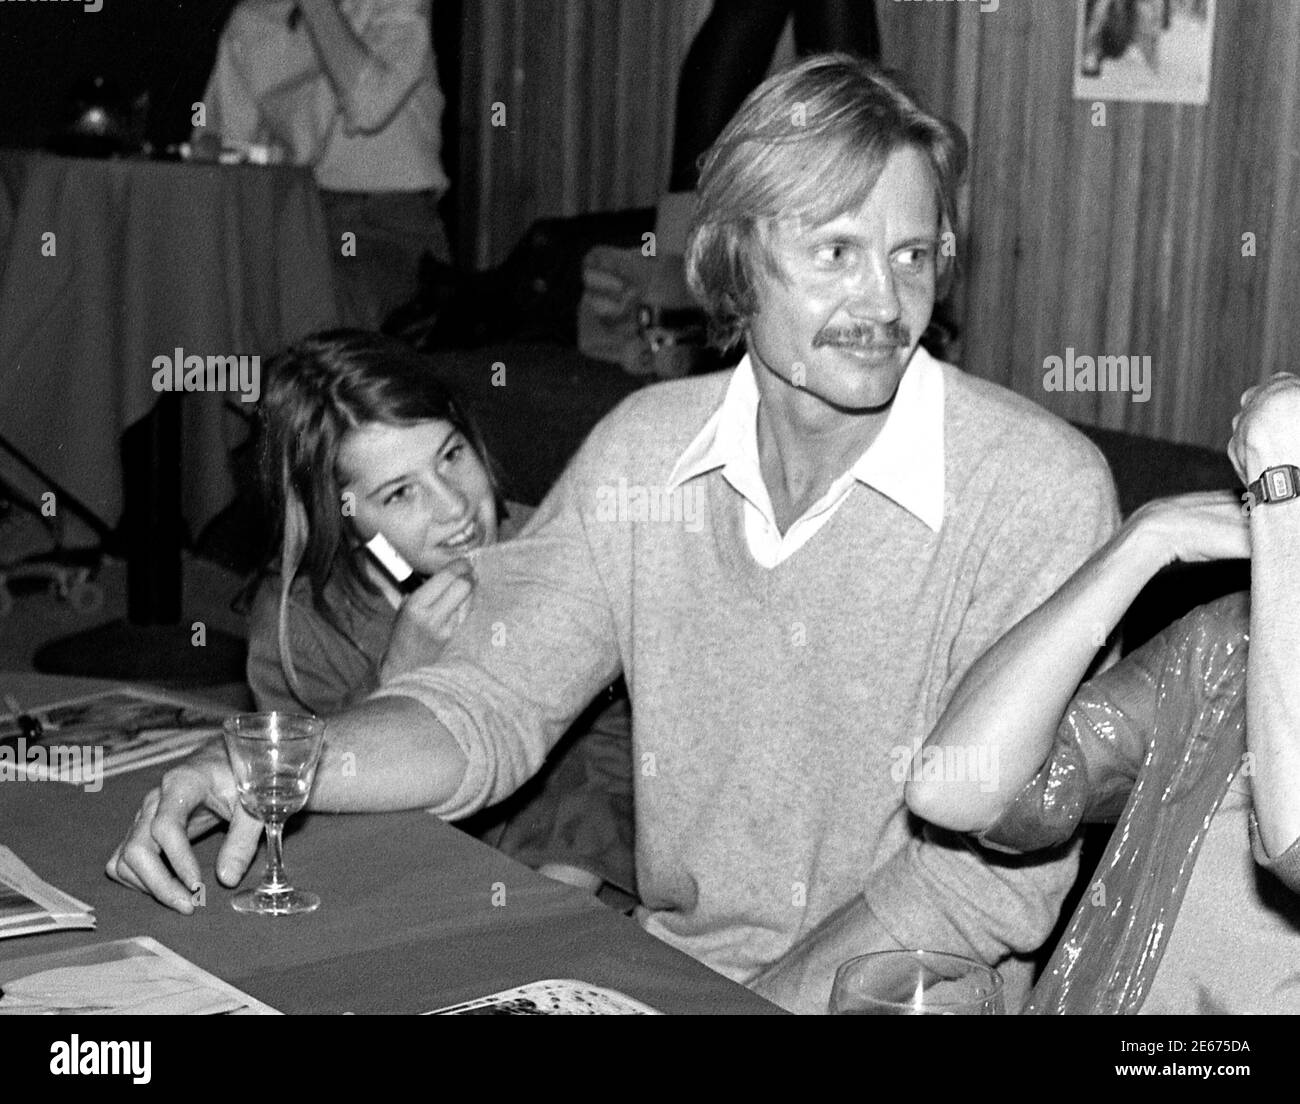 Jon Voigt and Jane Fonda autogrpahing photos at Flippers Roller Disco event in support of ERA, LosAngeles, OCt. 29, 1978 Stock Photo